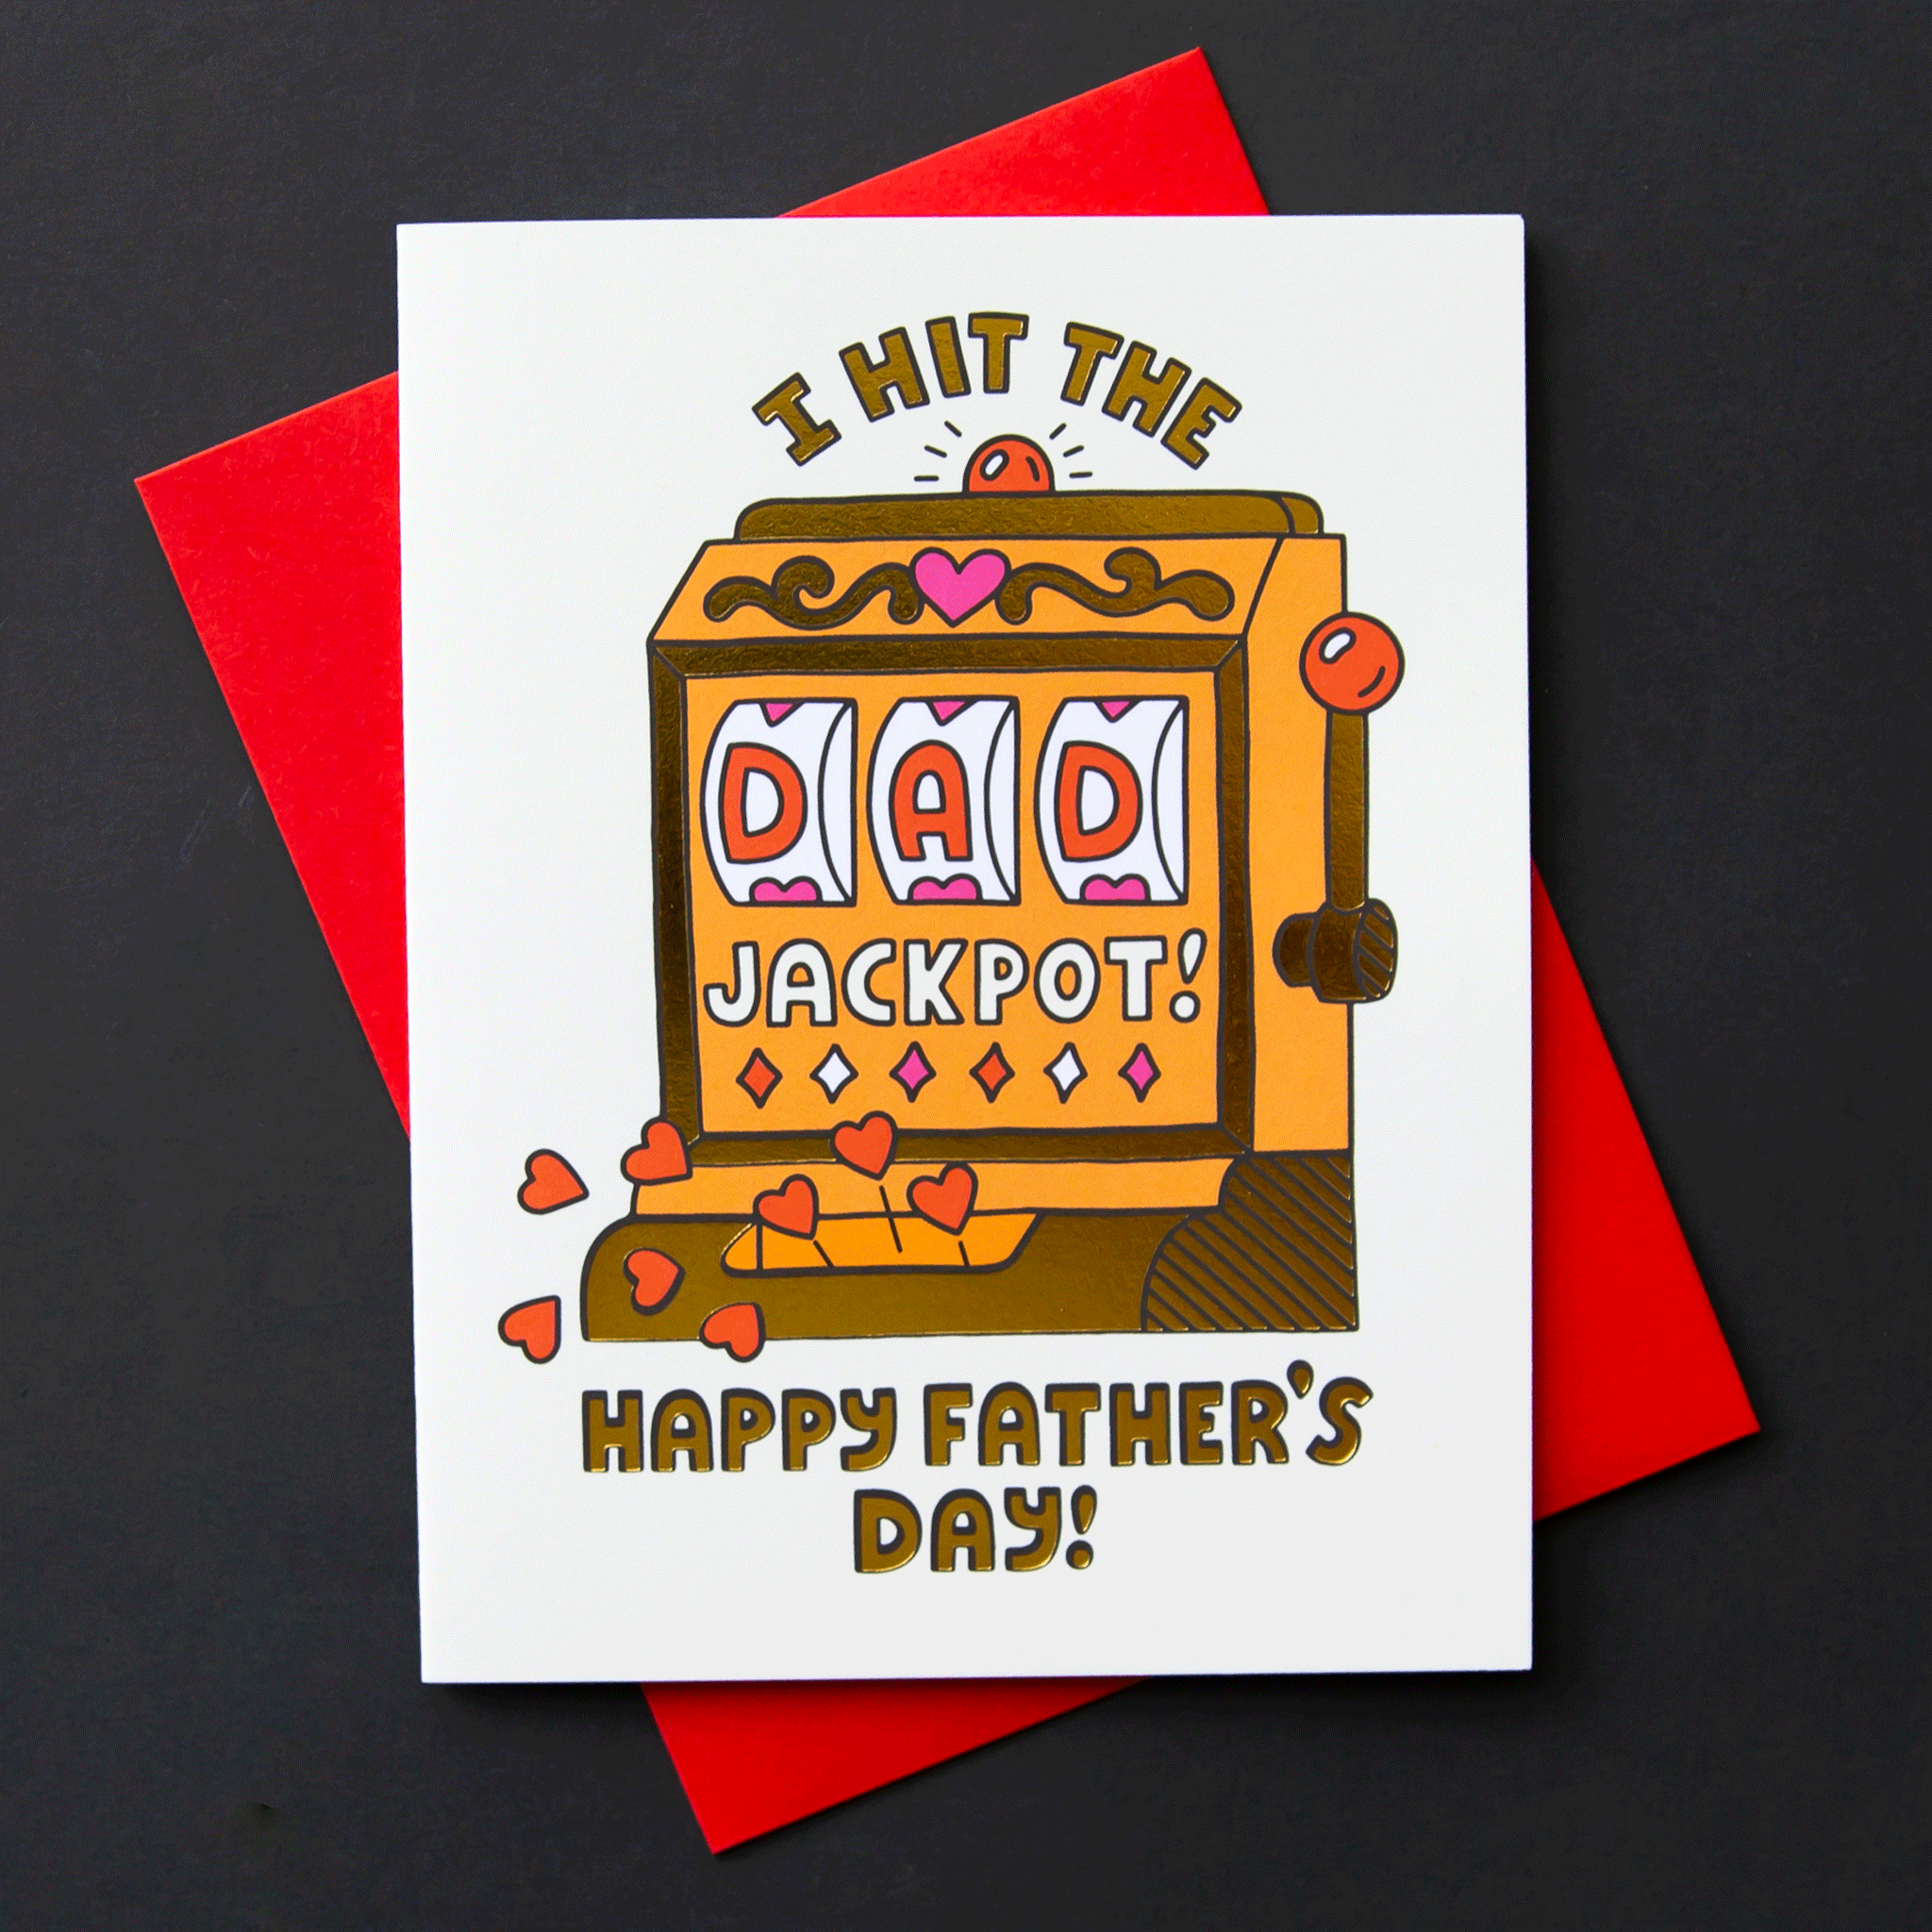 On a black background is a white card with an orange and gold slot machine that&#39;s detailed with hearts and reads, &quot;I hit the DAD jackpot! Happy Father&#39;s Day!&quot;. &quot;DAD&quot; is written in the slot machine as the winning numbers. Also included is a coordinating white envelope.